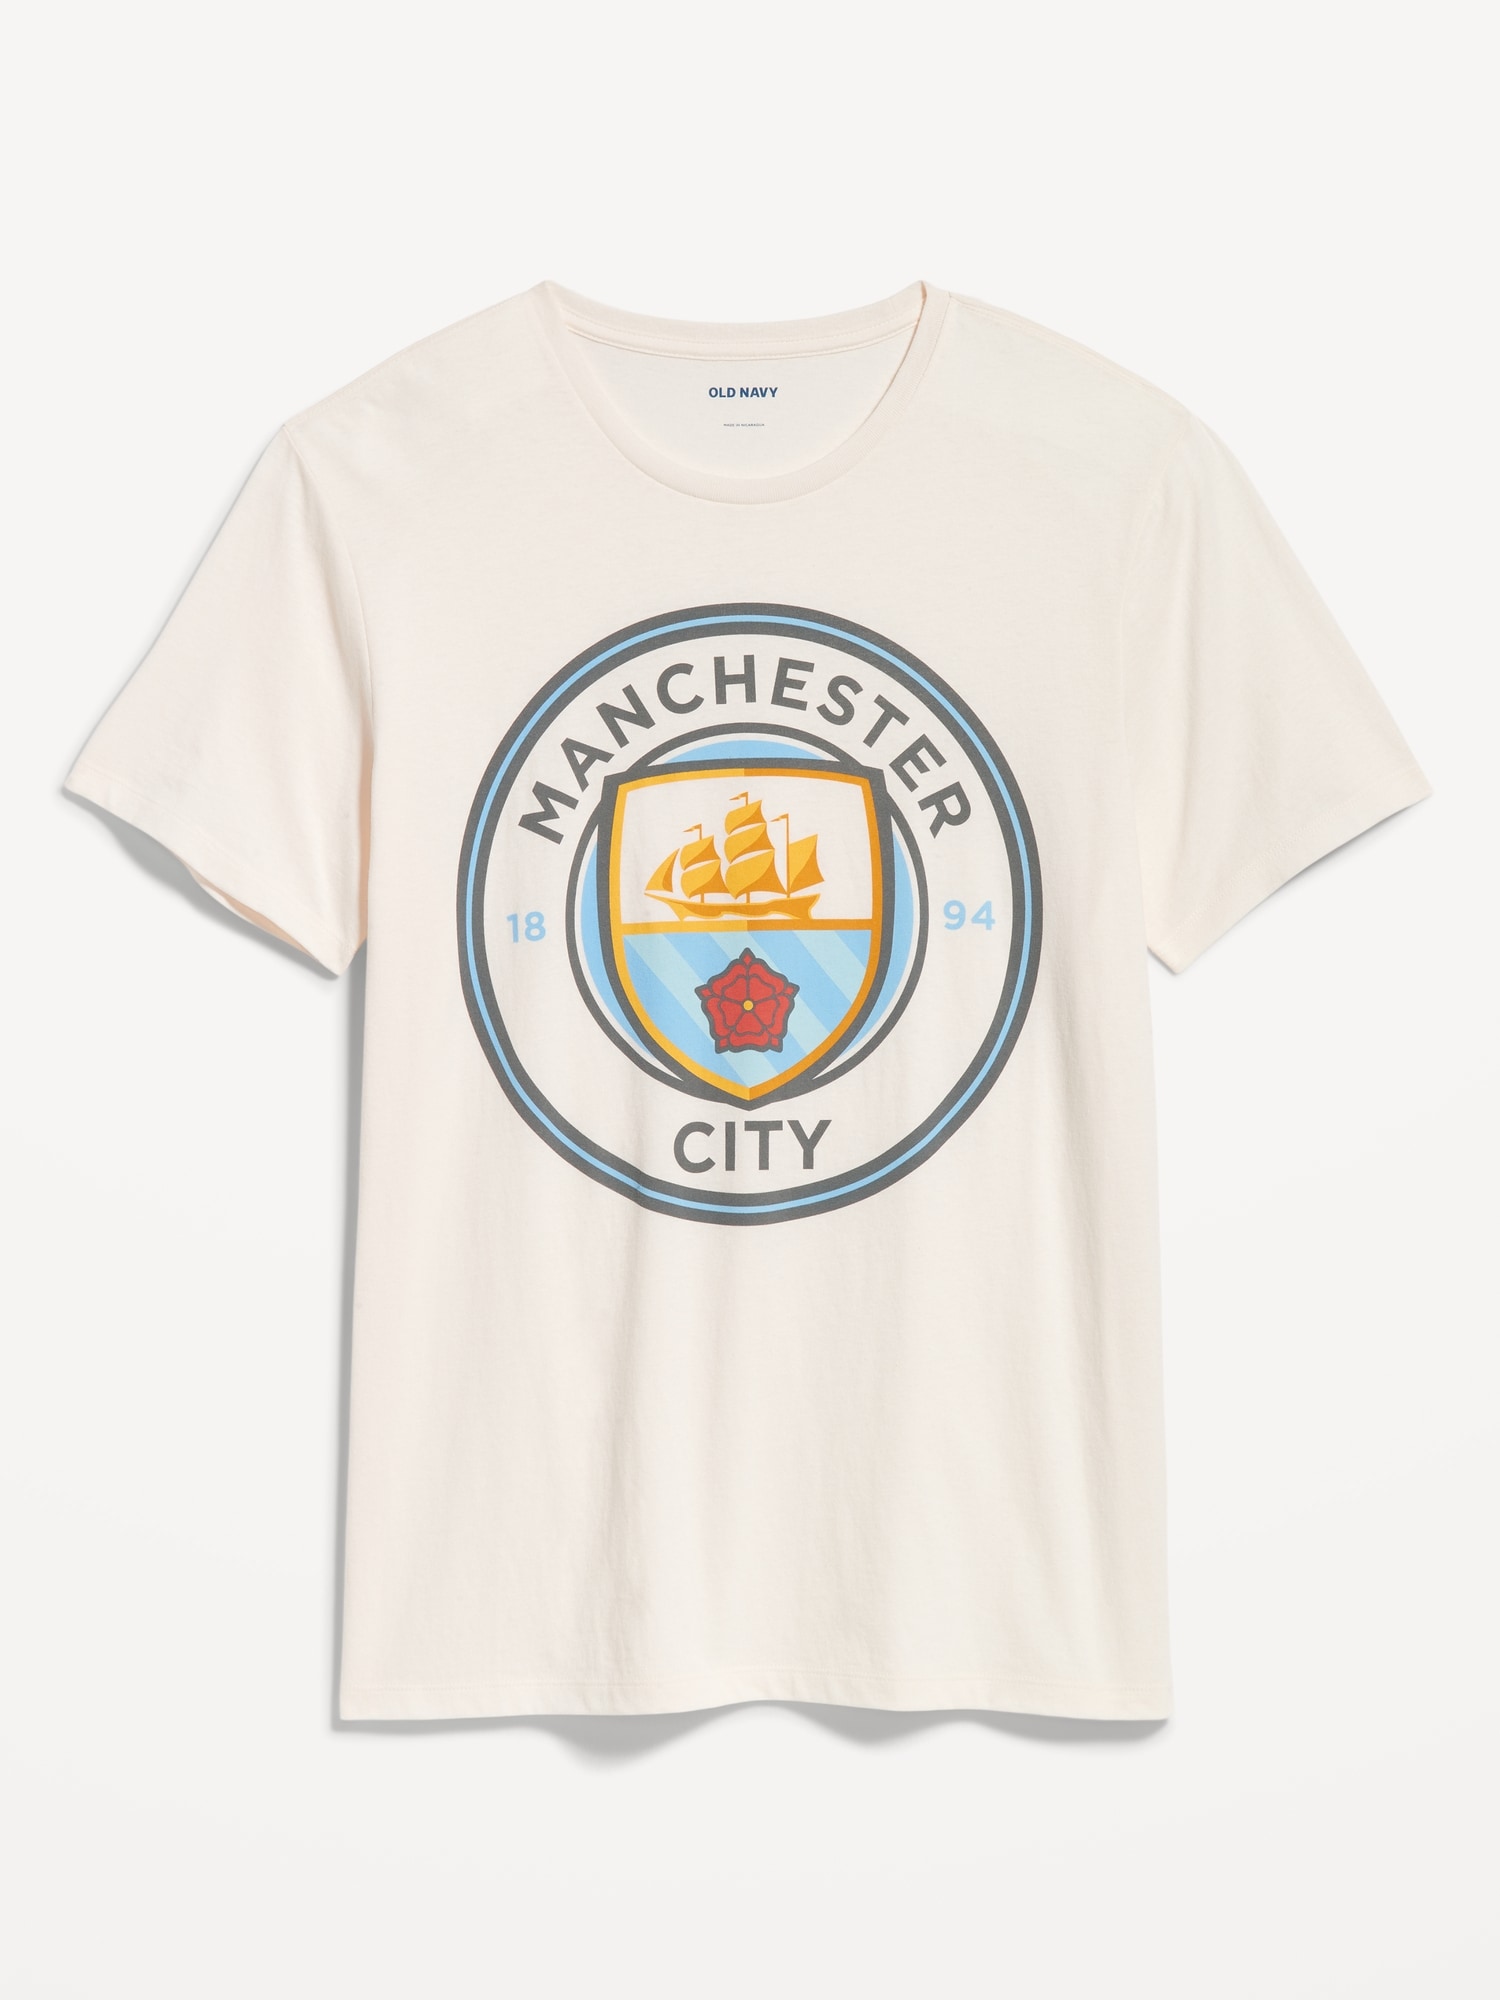 Manchester City© Gender-Neutral T-Shirt for Adults